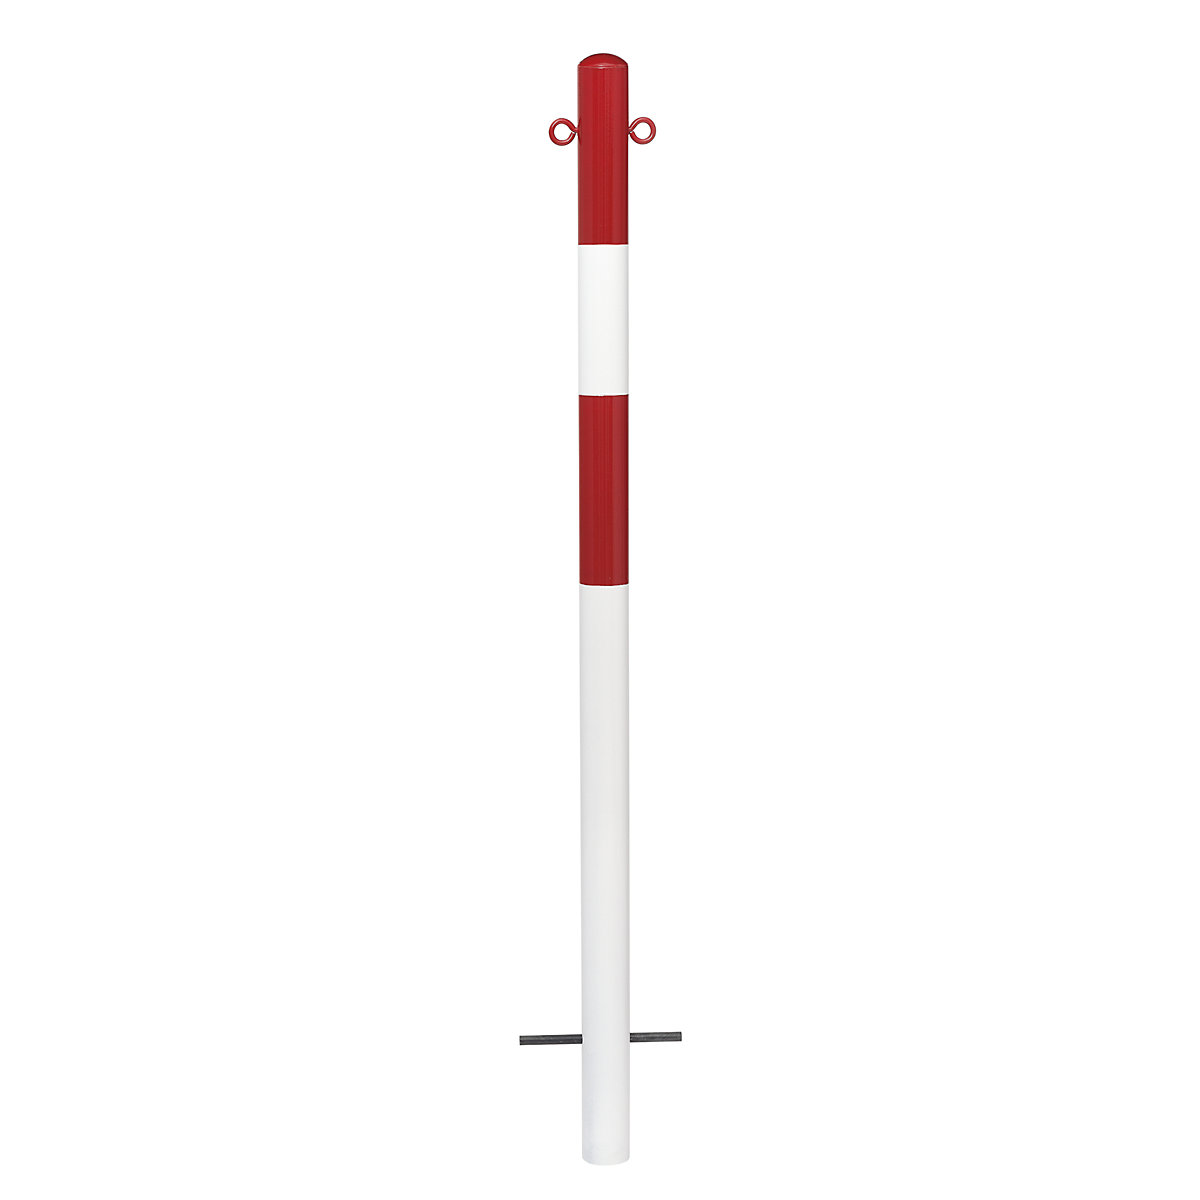 Barrier post, for setting in concrete, Ø 60 mm, red/white plastic coated, 2 eyelets-11